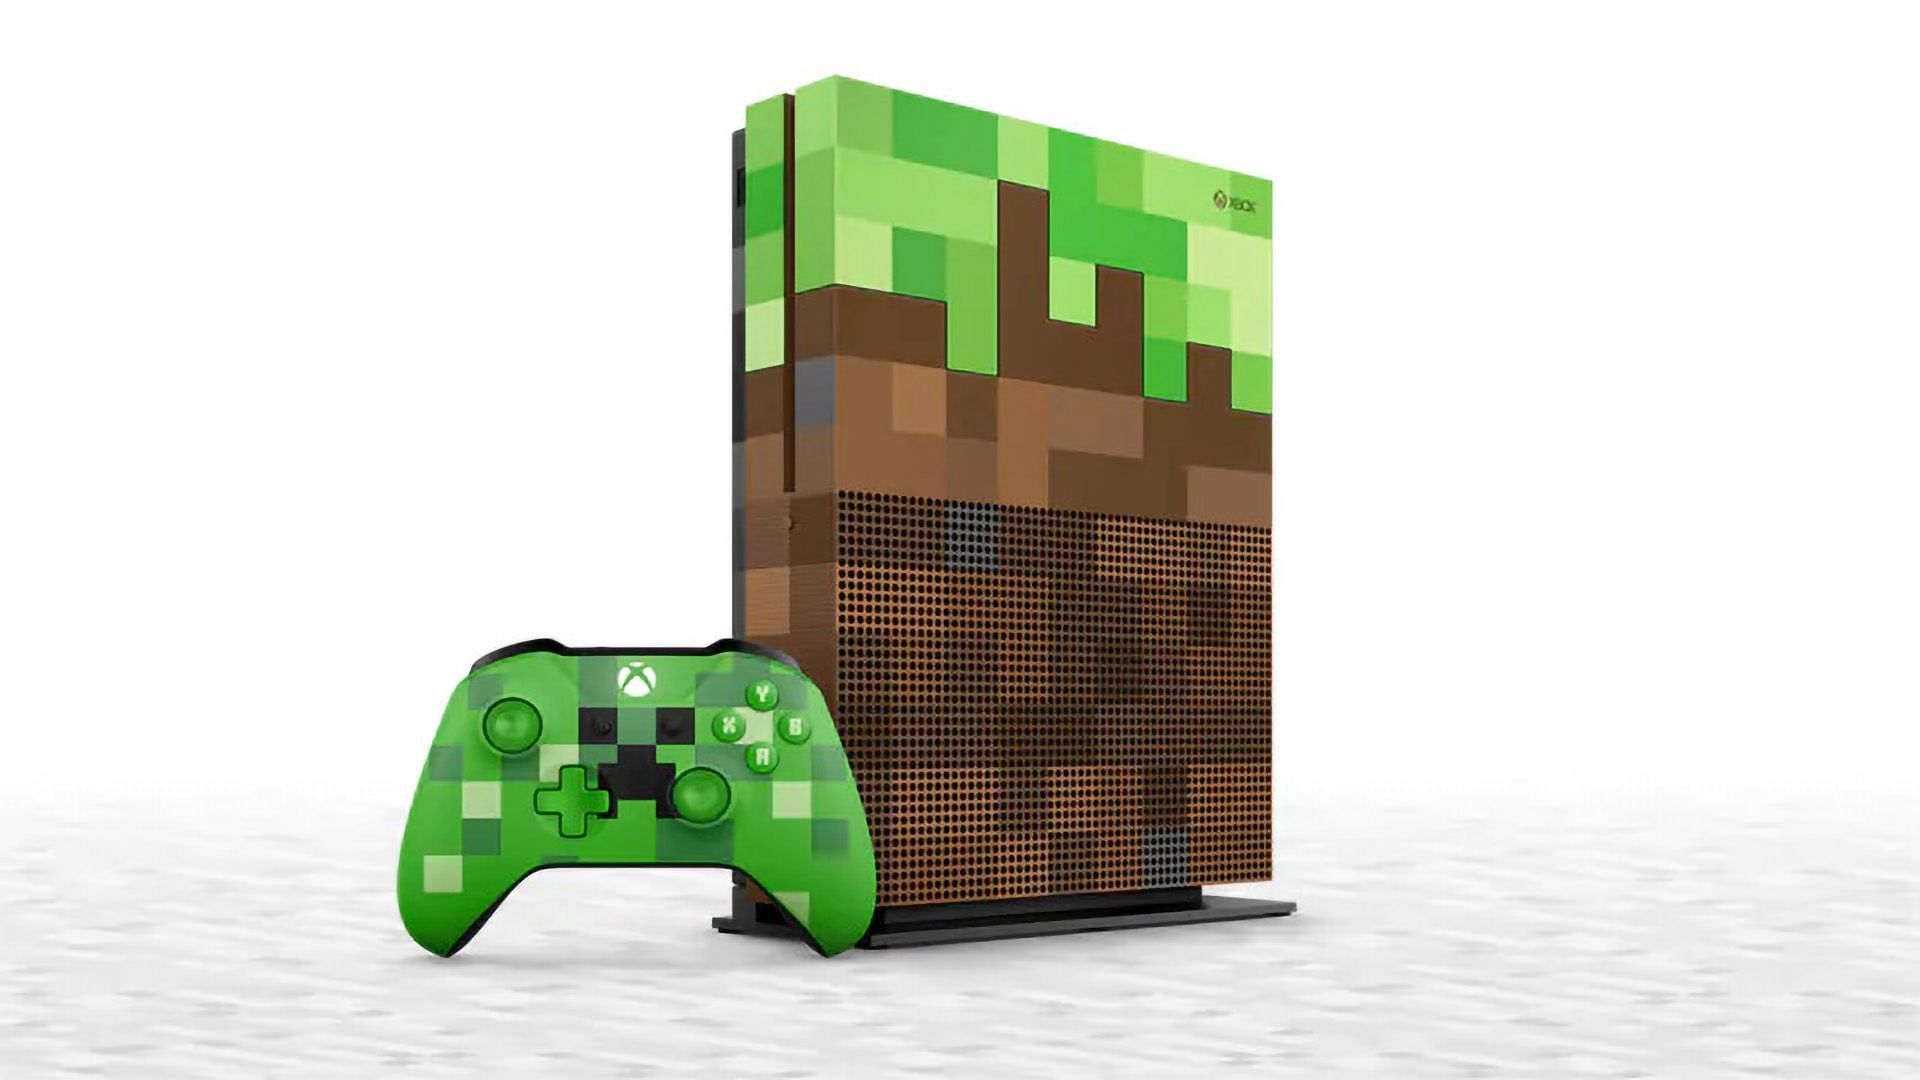 Minecraft installation guide for Windows, Android, iOS, Xbox, and more